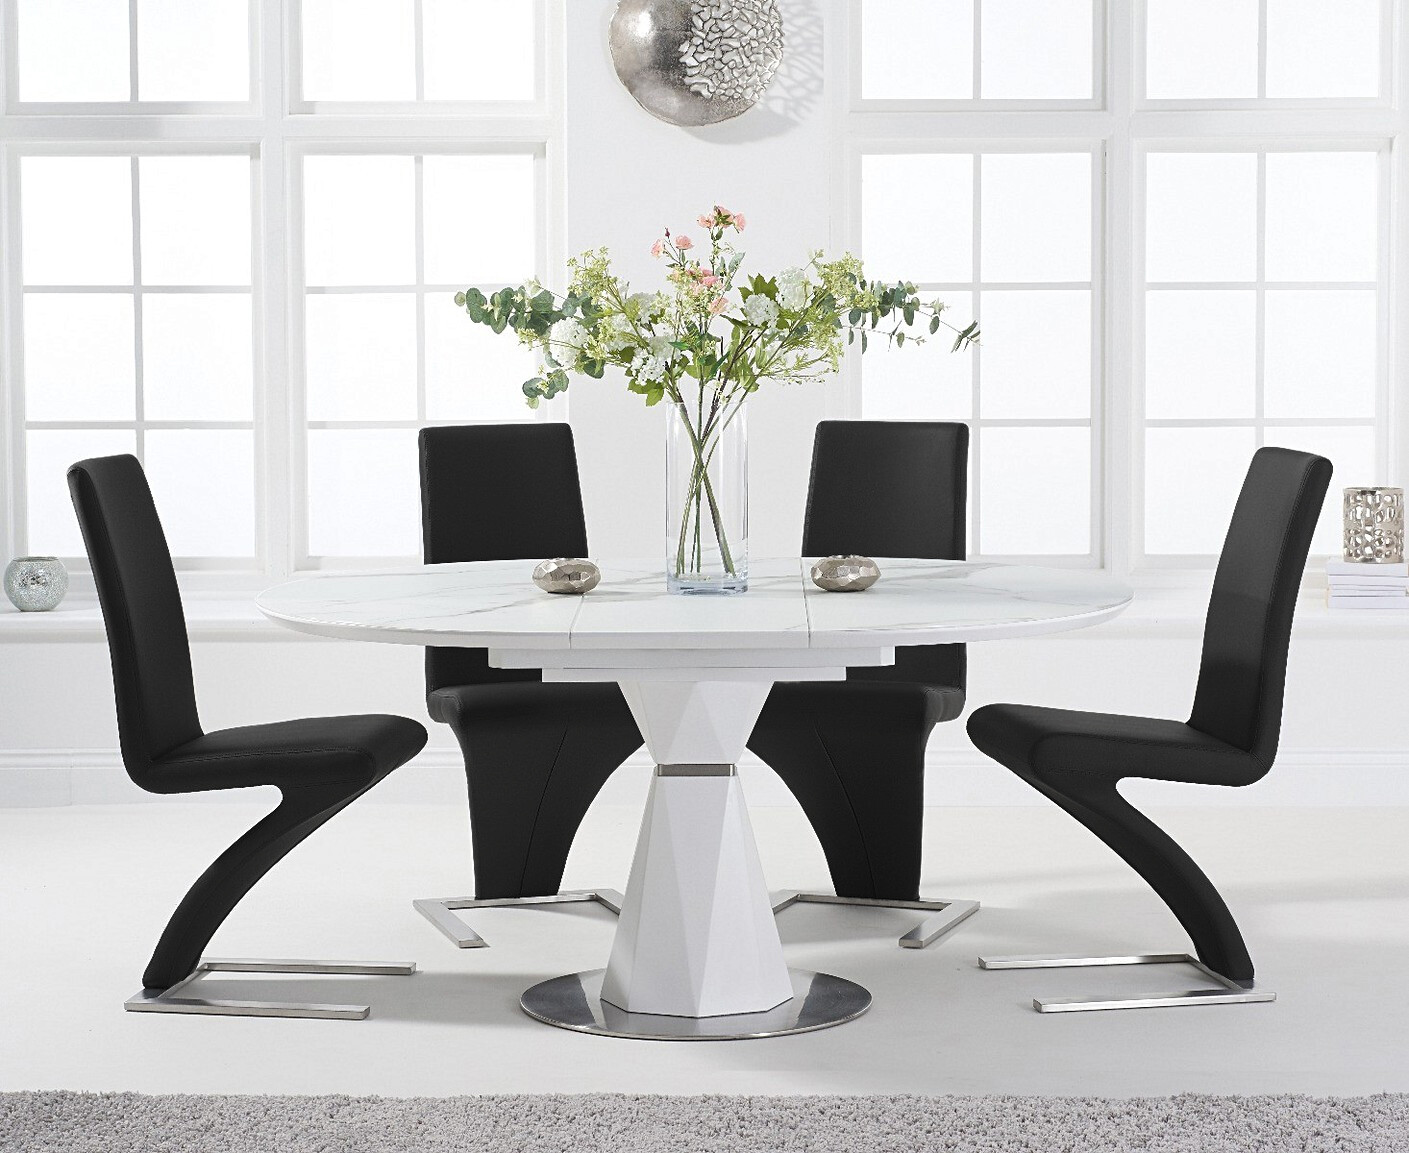 Photo 3 of Venosa 120cm round white dining table with 6 black aldo chairs